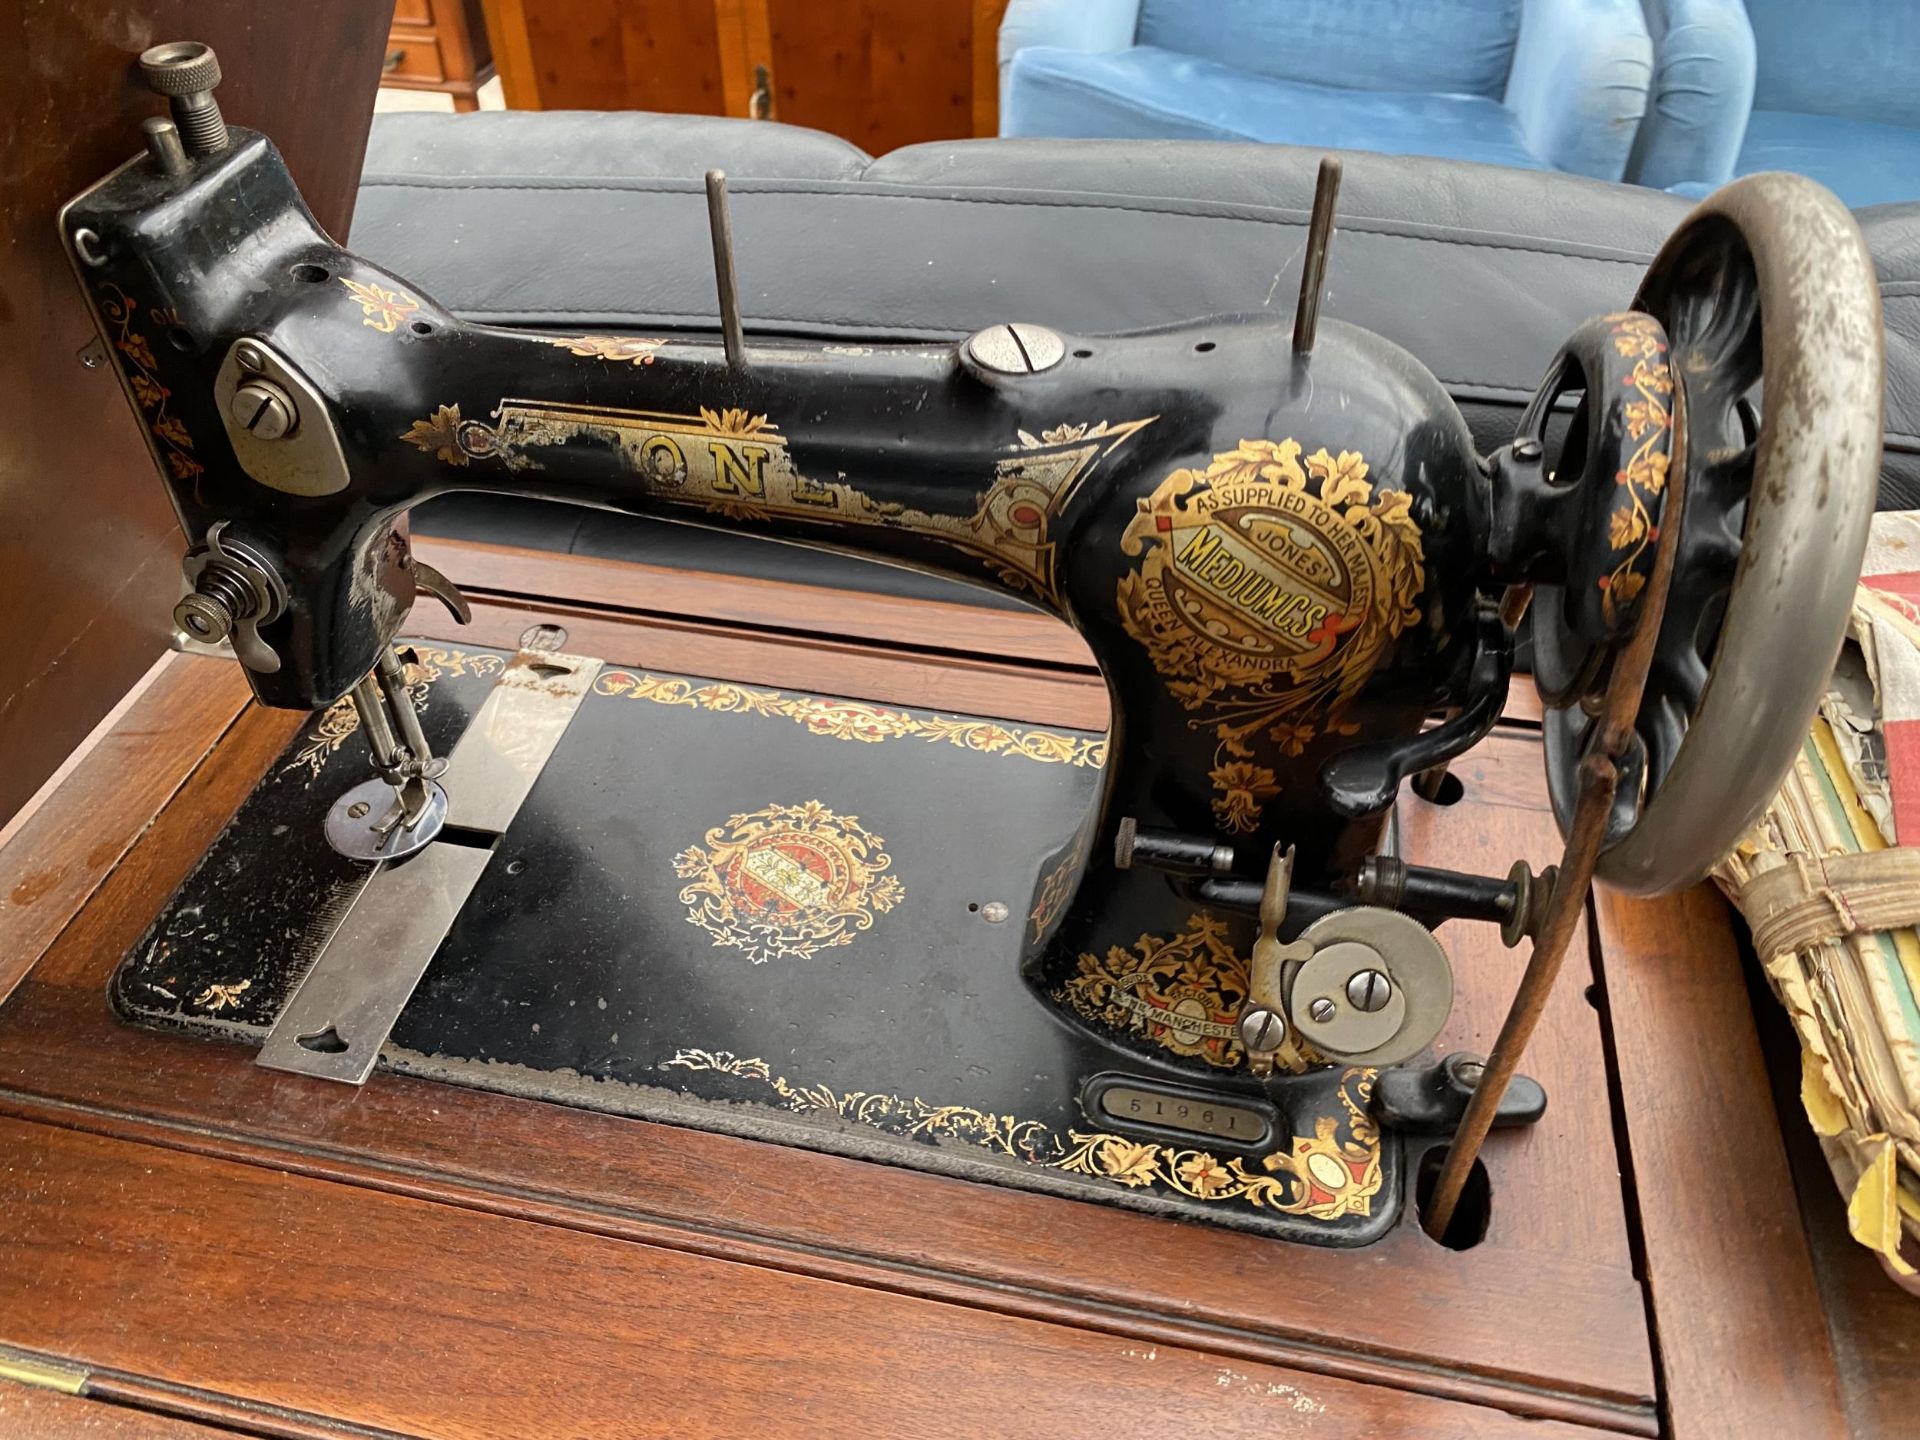 A SINGER TREADLE SEWING MACHINE (NO.51961) AND A QUANTITY OF PATTERN PAMPHLETS - Image 2 of 2